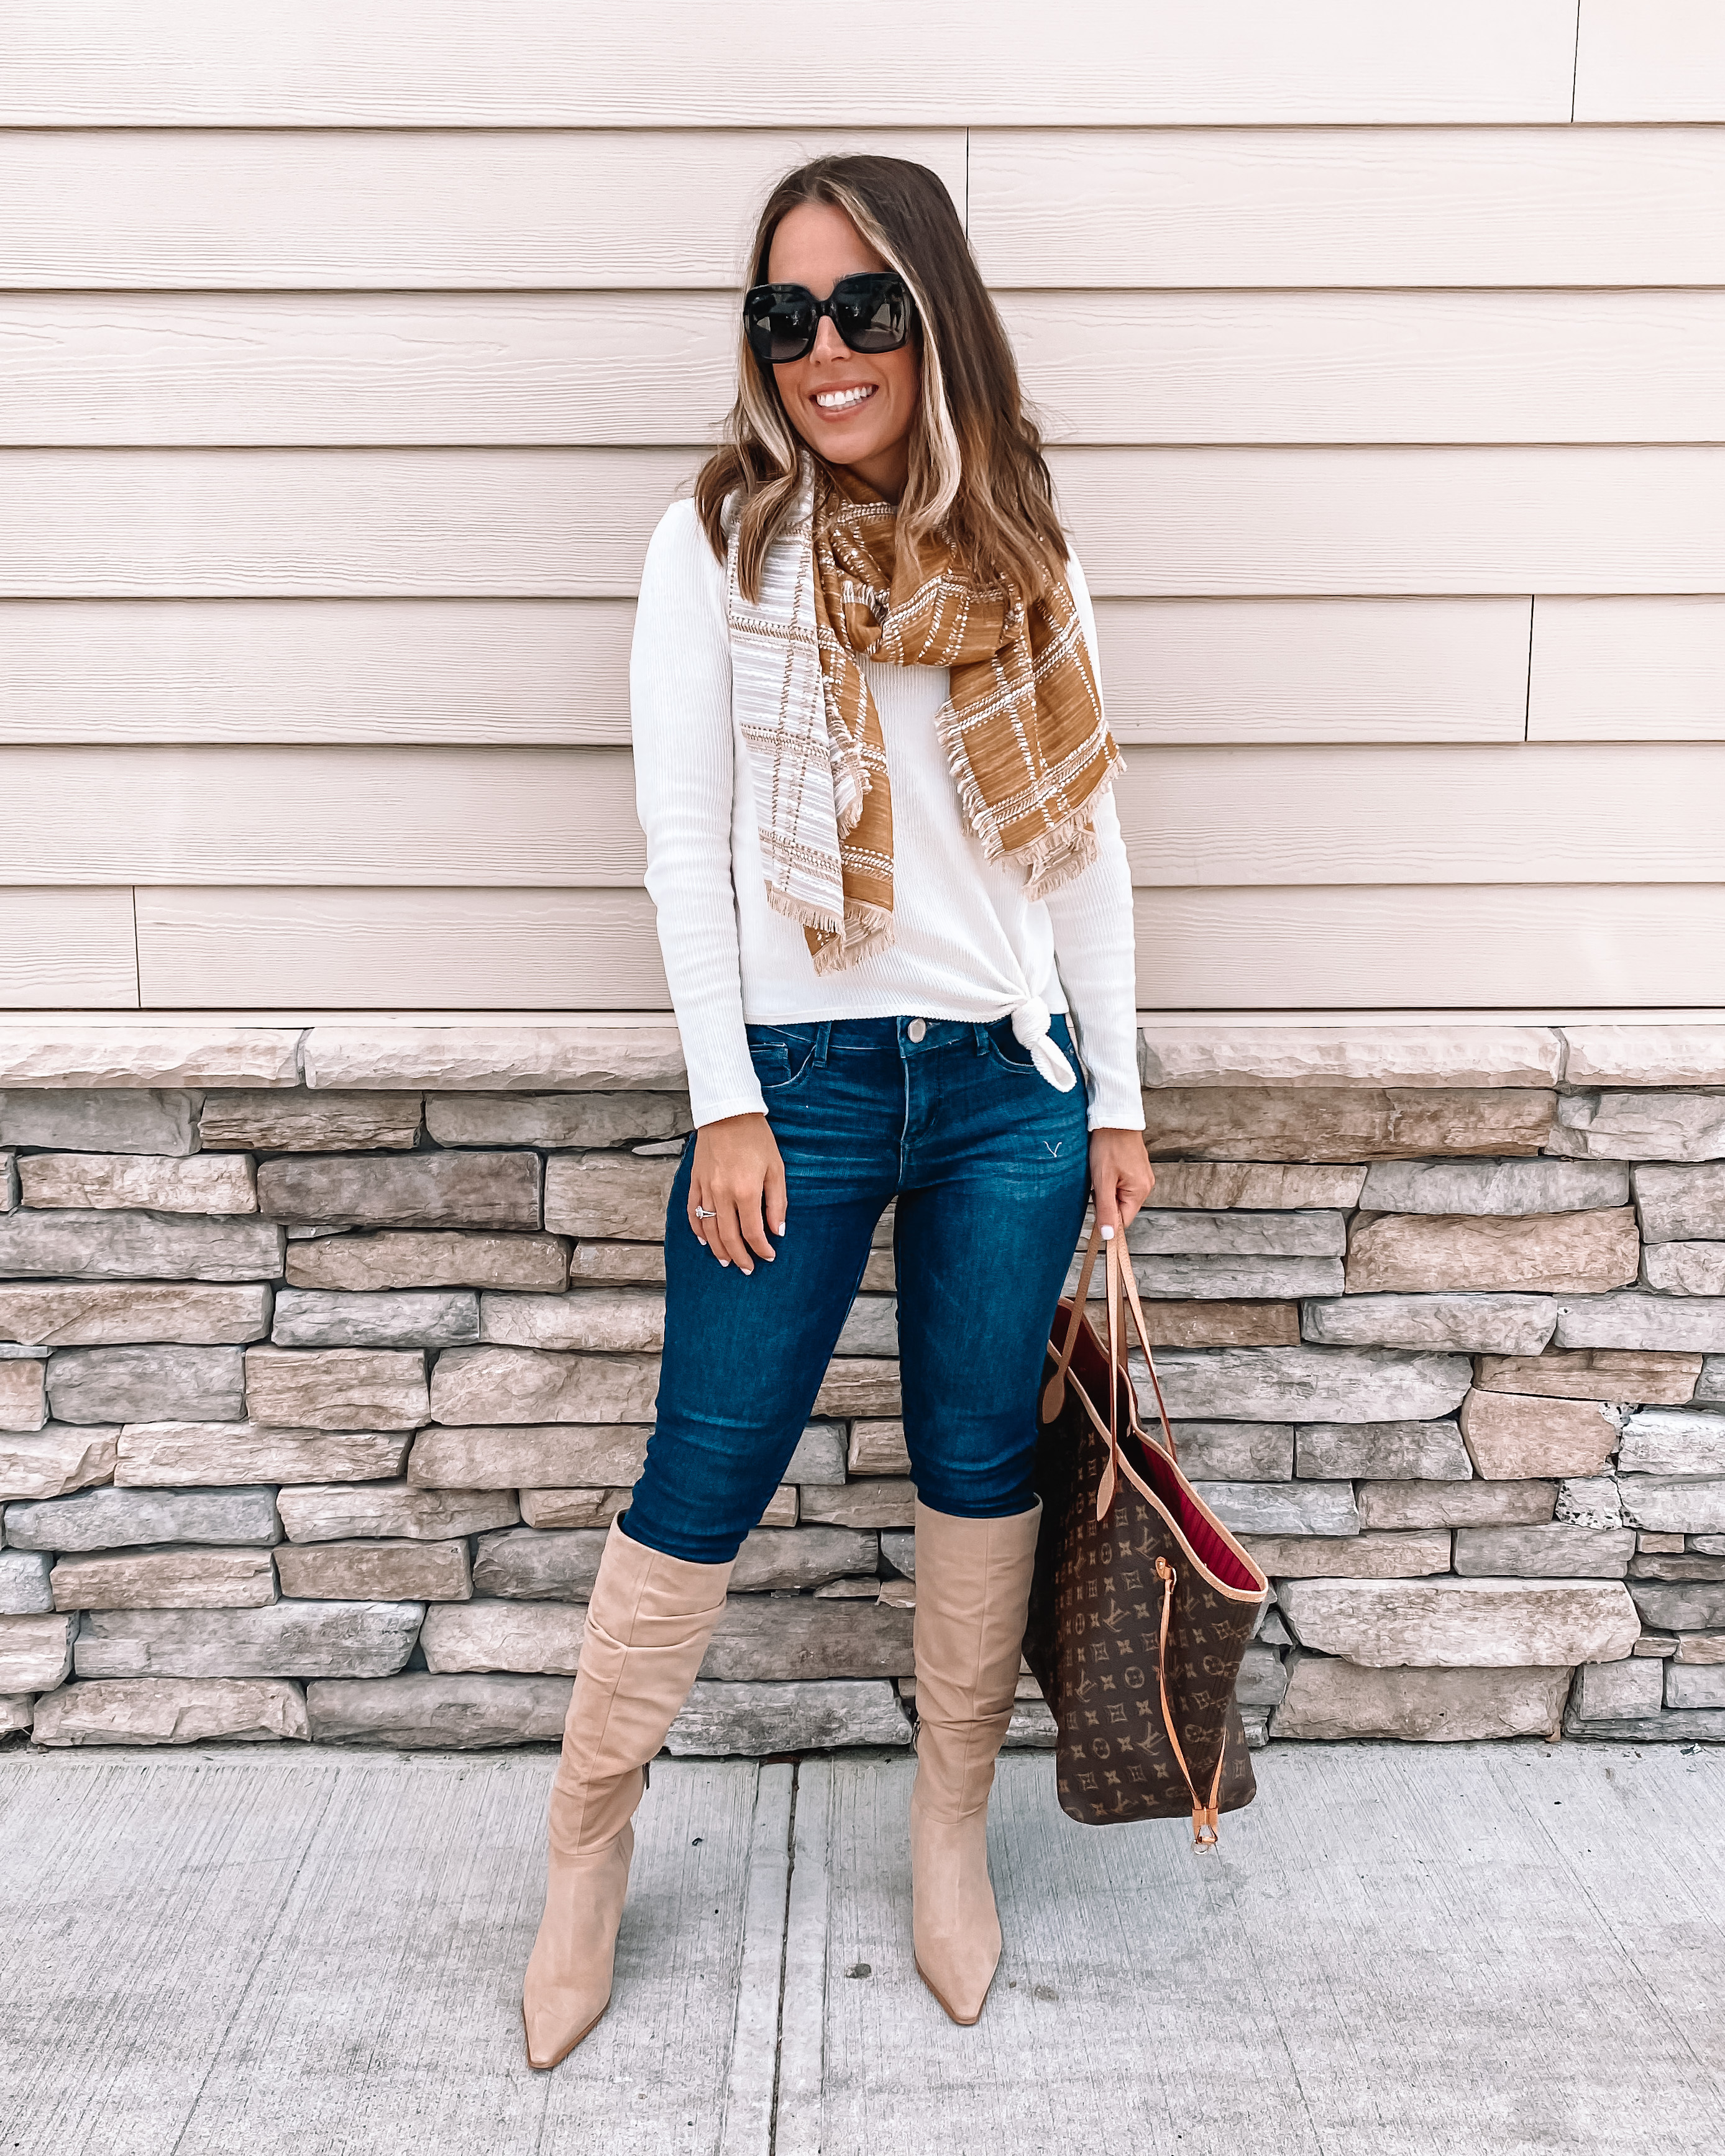 My Favorite Fall Accessory | MrsCasual